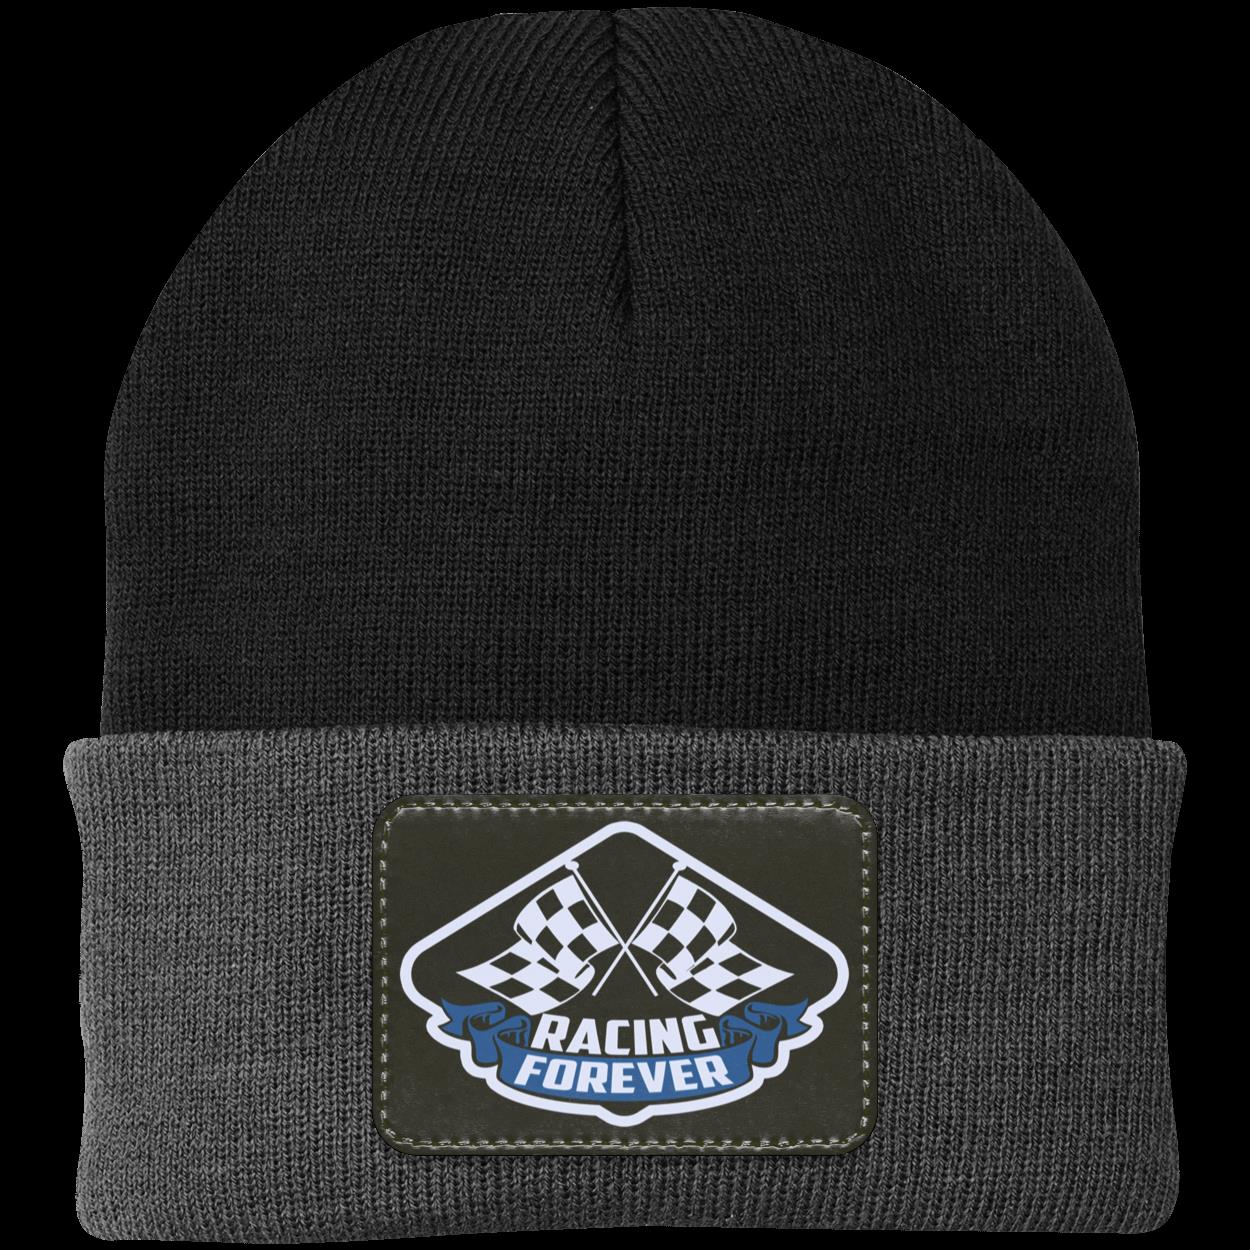 Racing Forever Patched Knit Cap V3